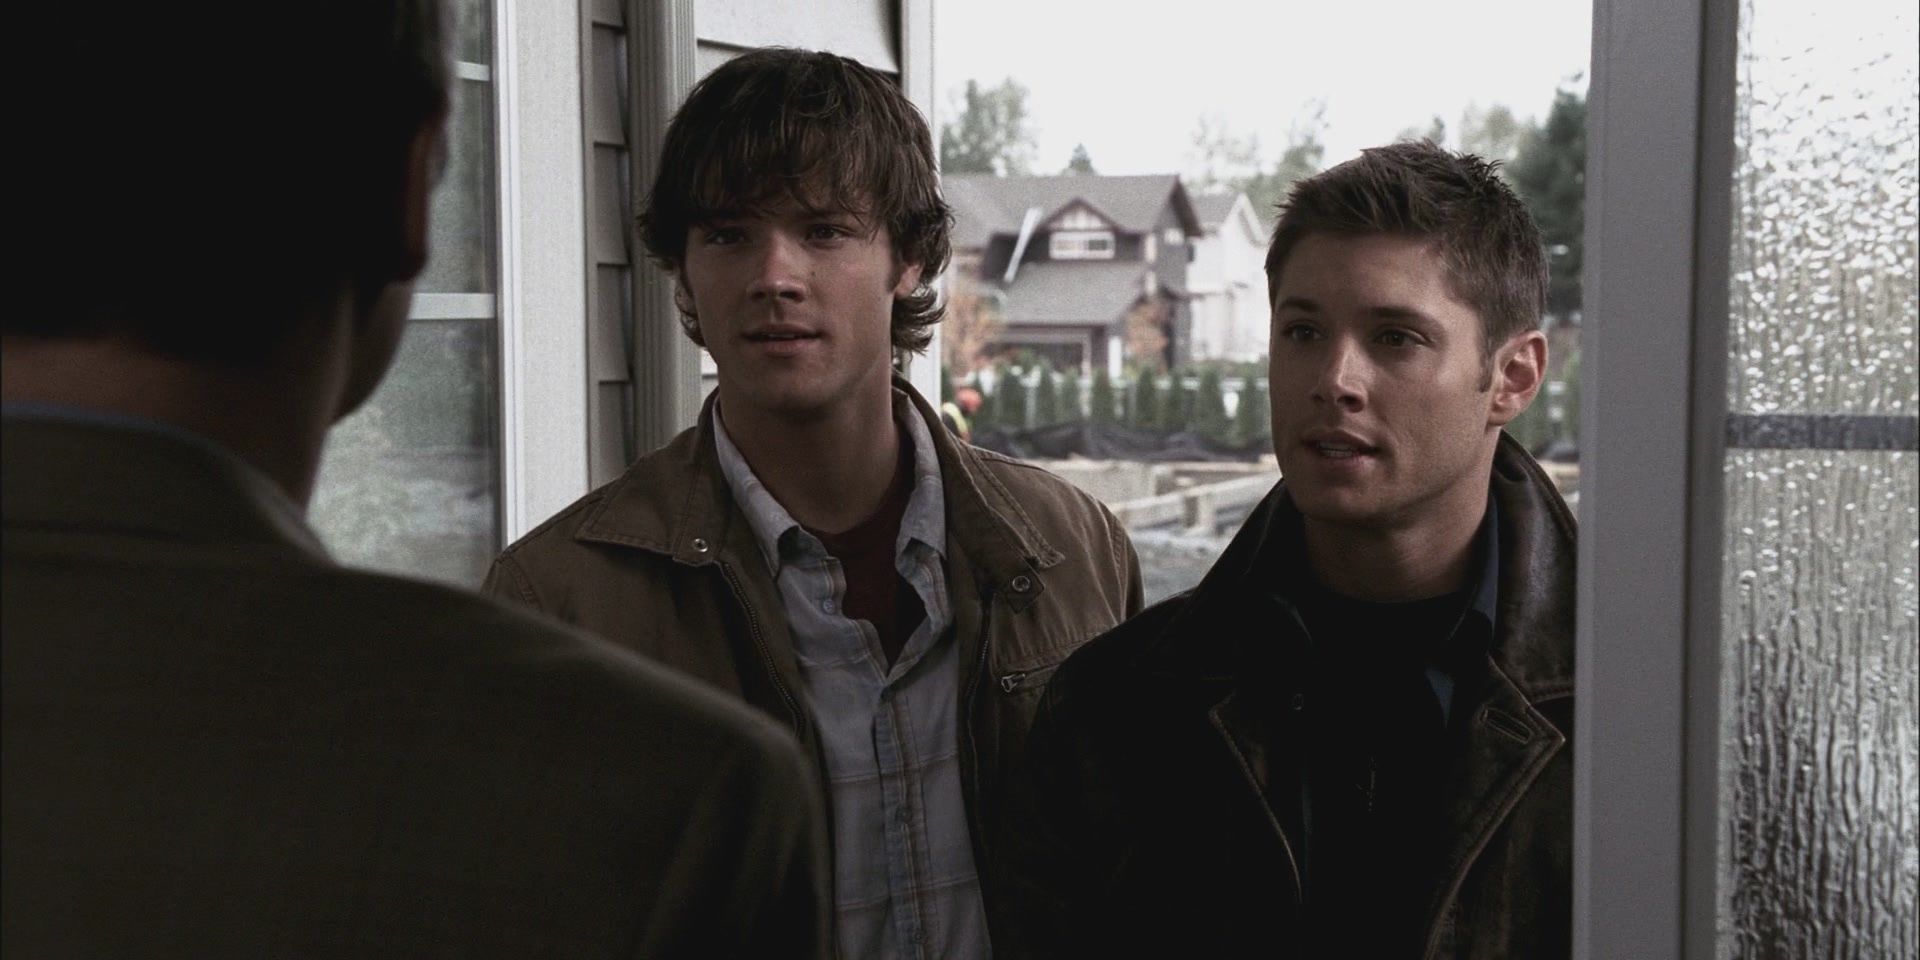 Sam and Dean house hunting in Supernatural